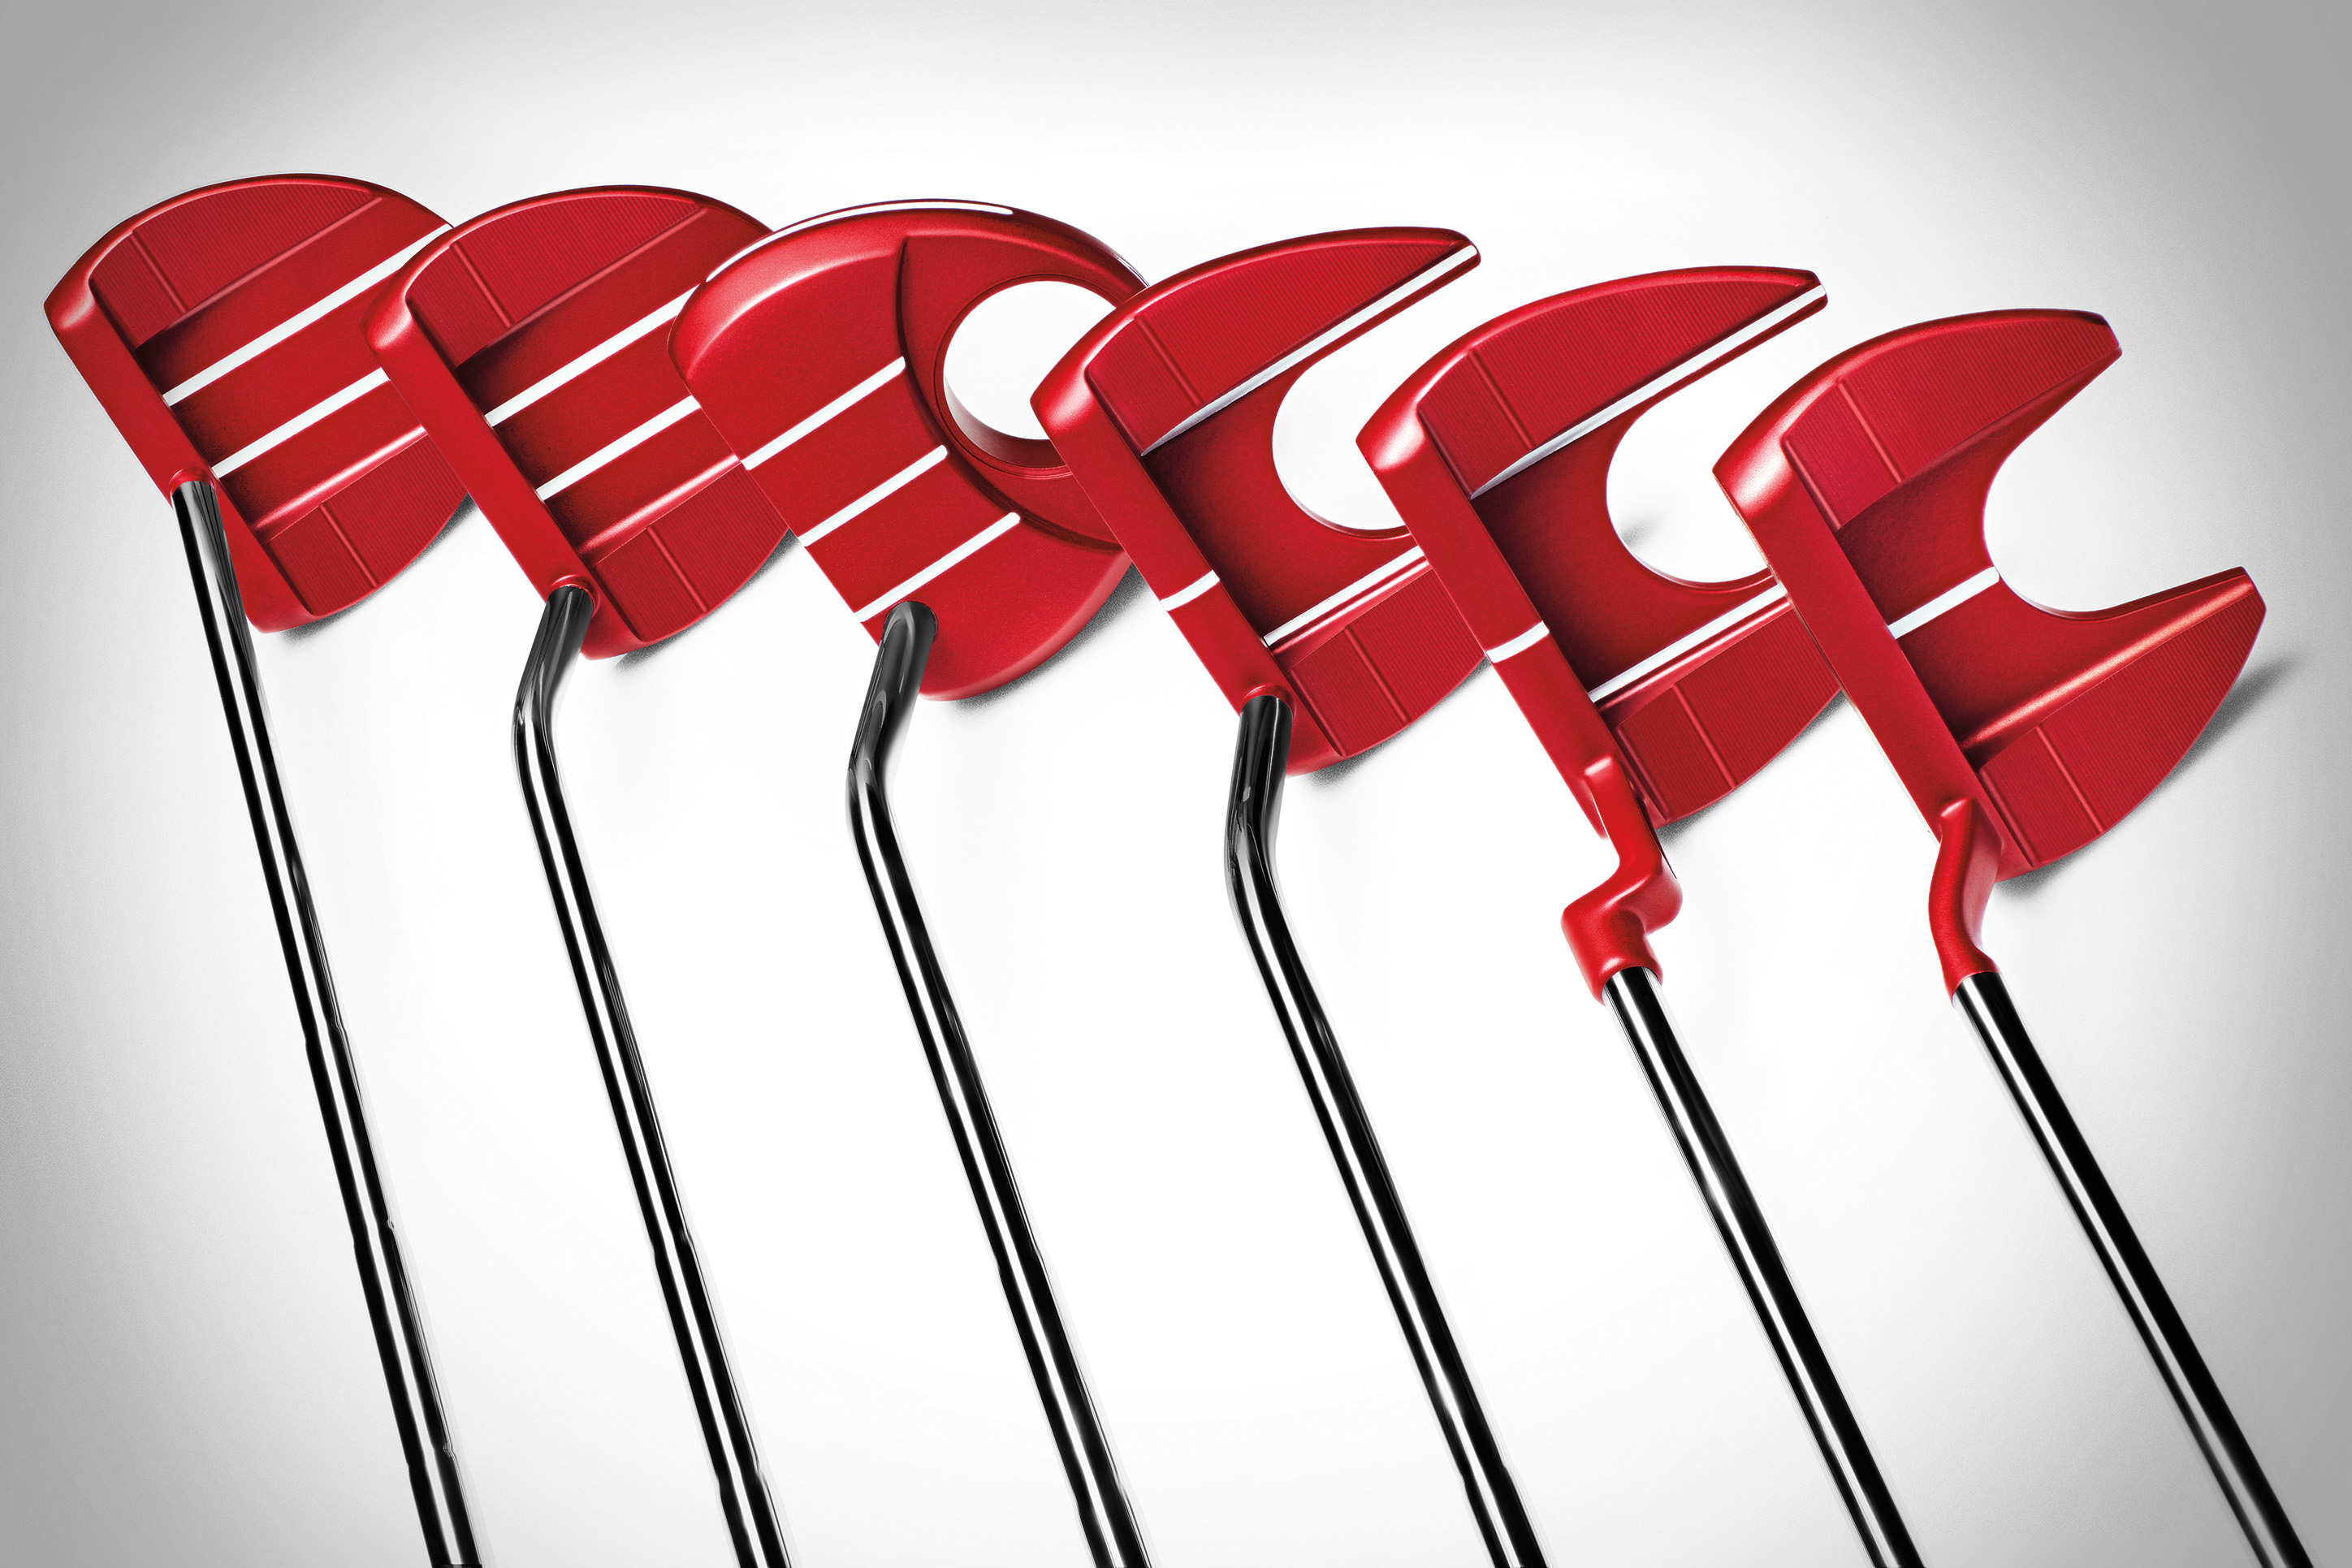 New putters for 2018 you should be excited about